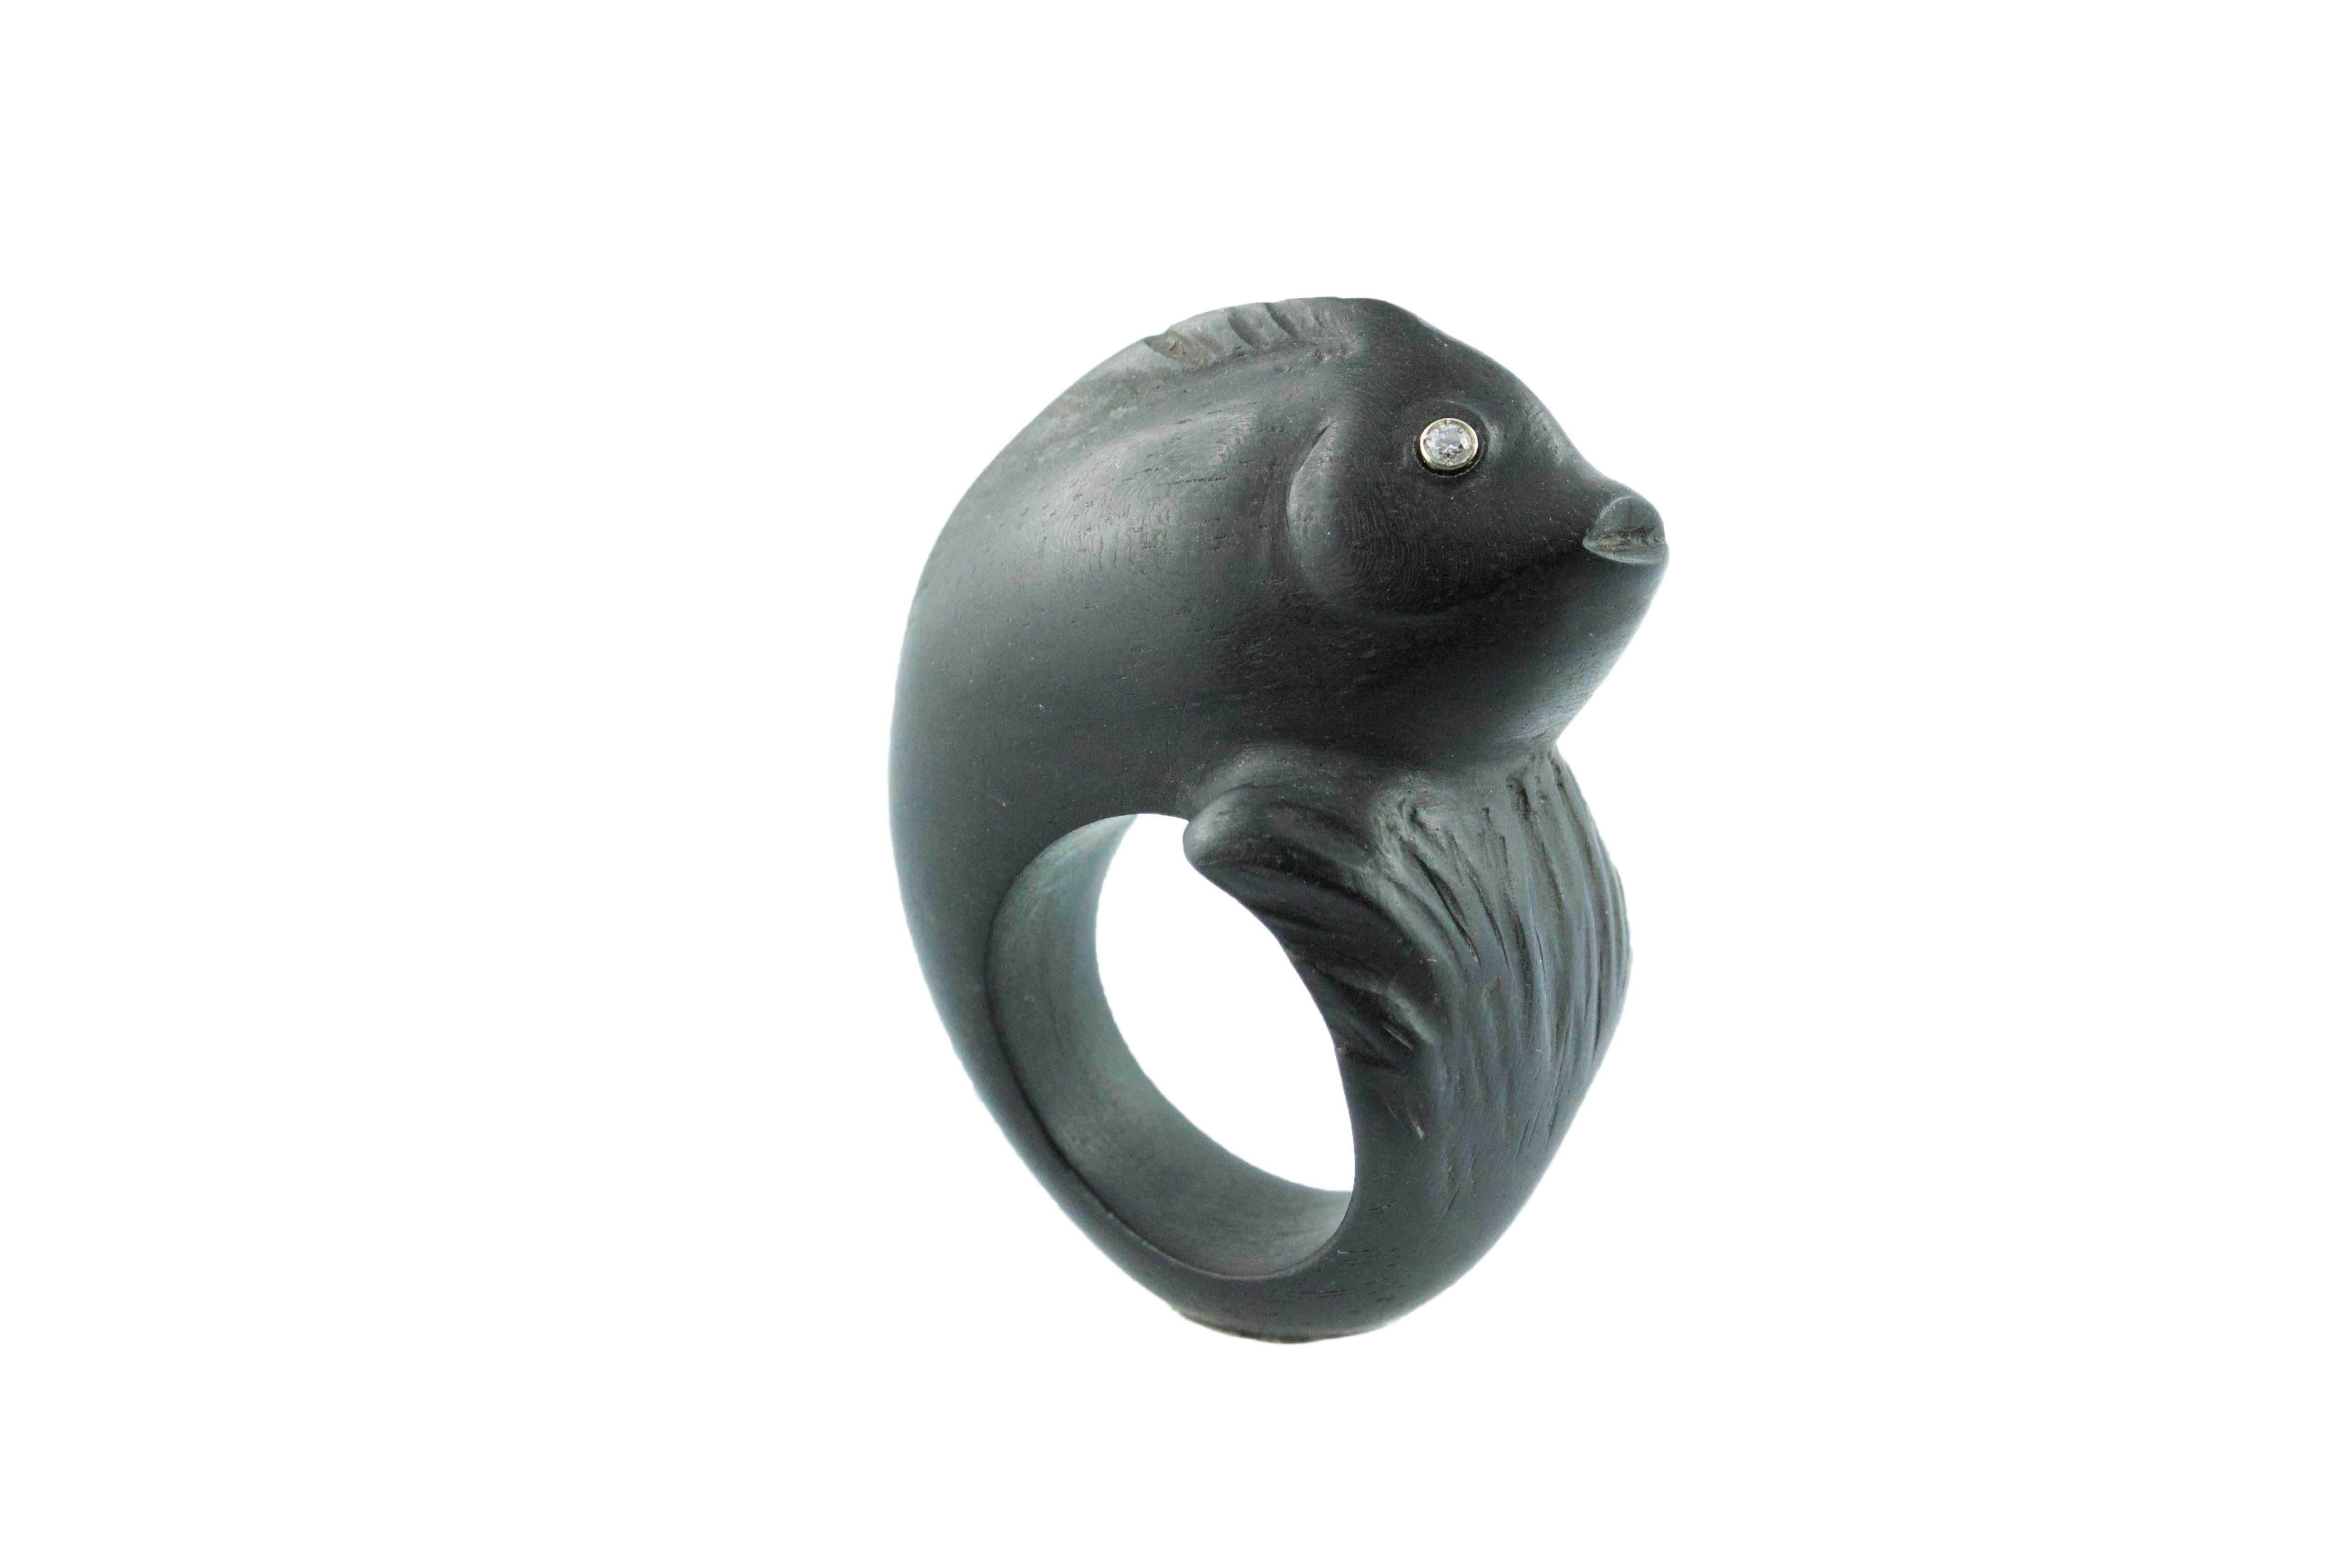 This fantastic ring is entirely hand-carver and raffigure a fish, realized in wood with an extraordinary attention to detail like the lips and the tail and is adorned with two diamonds as eyes.
